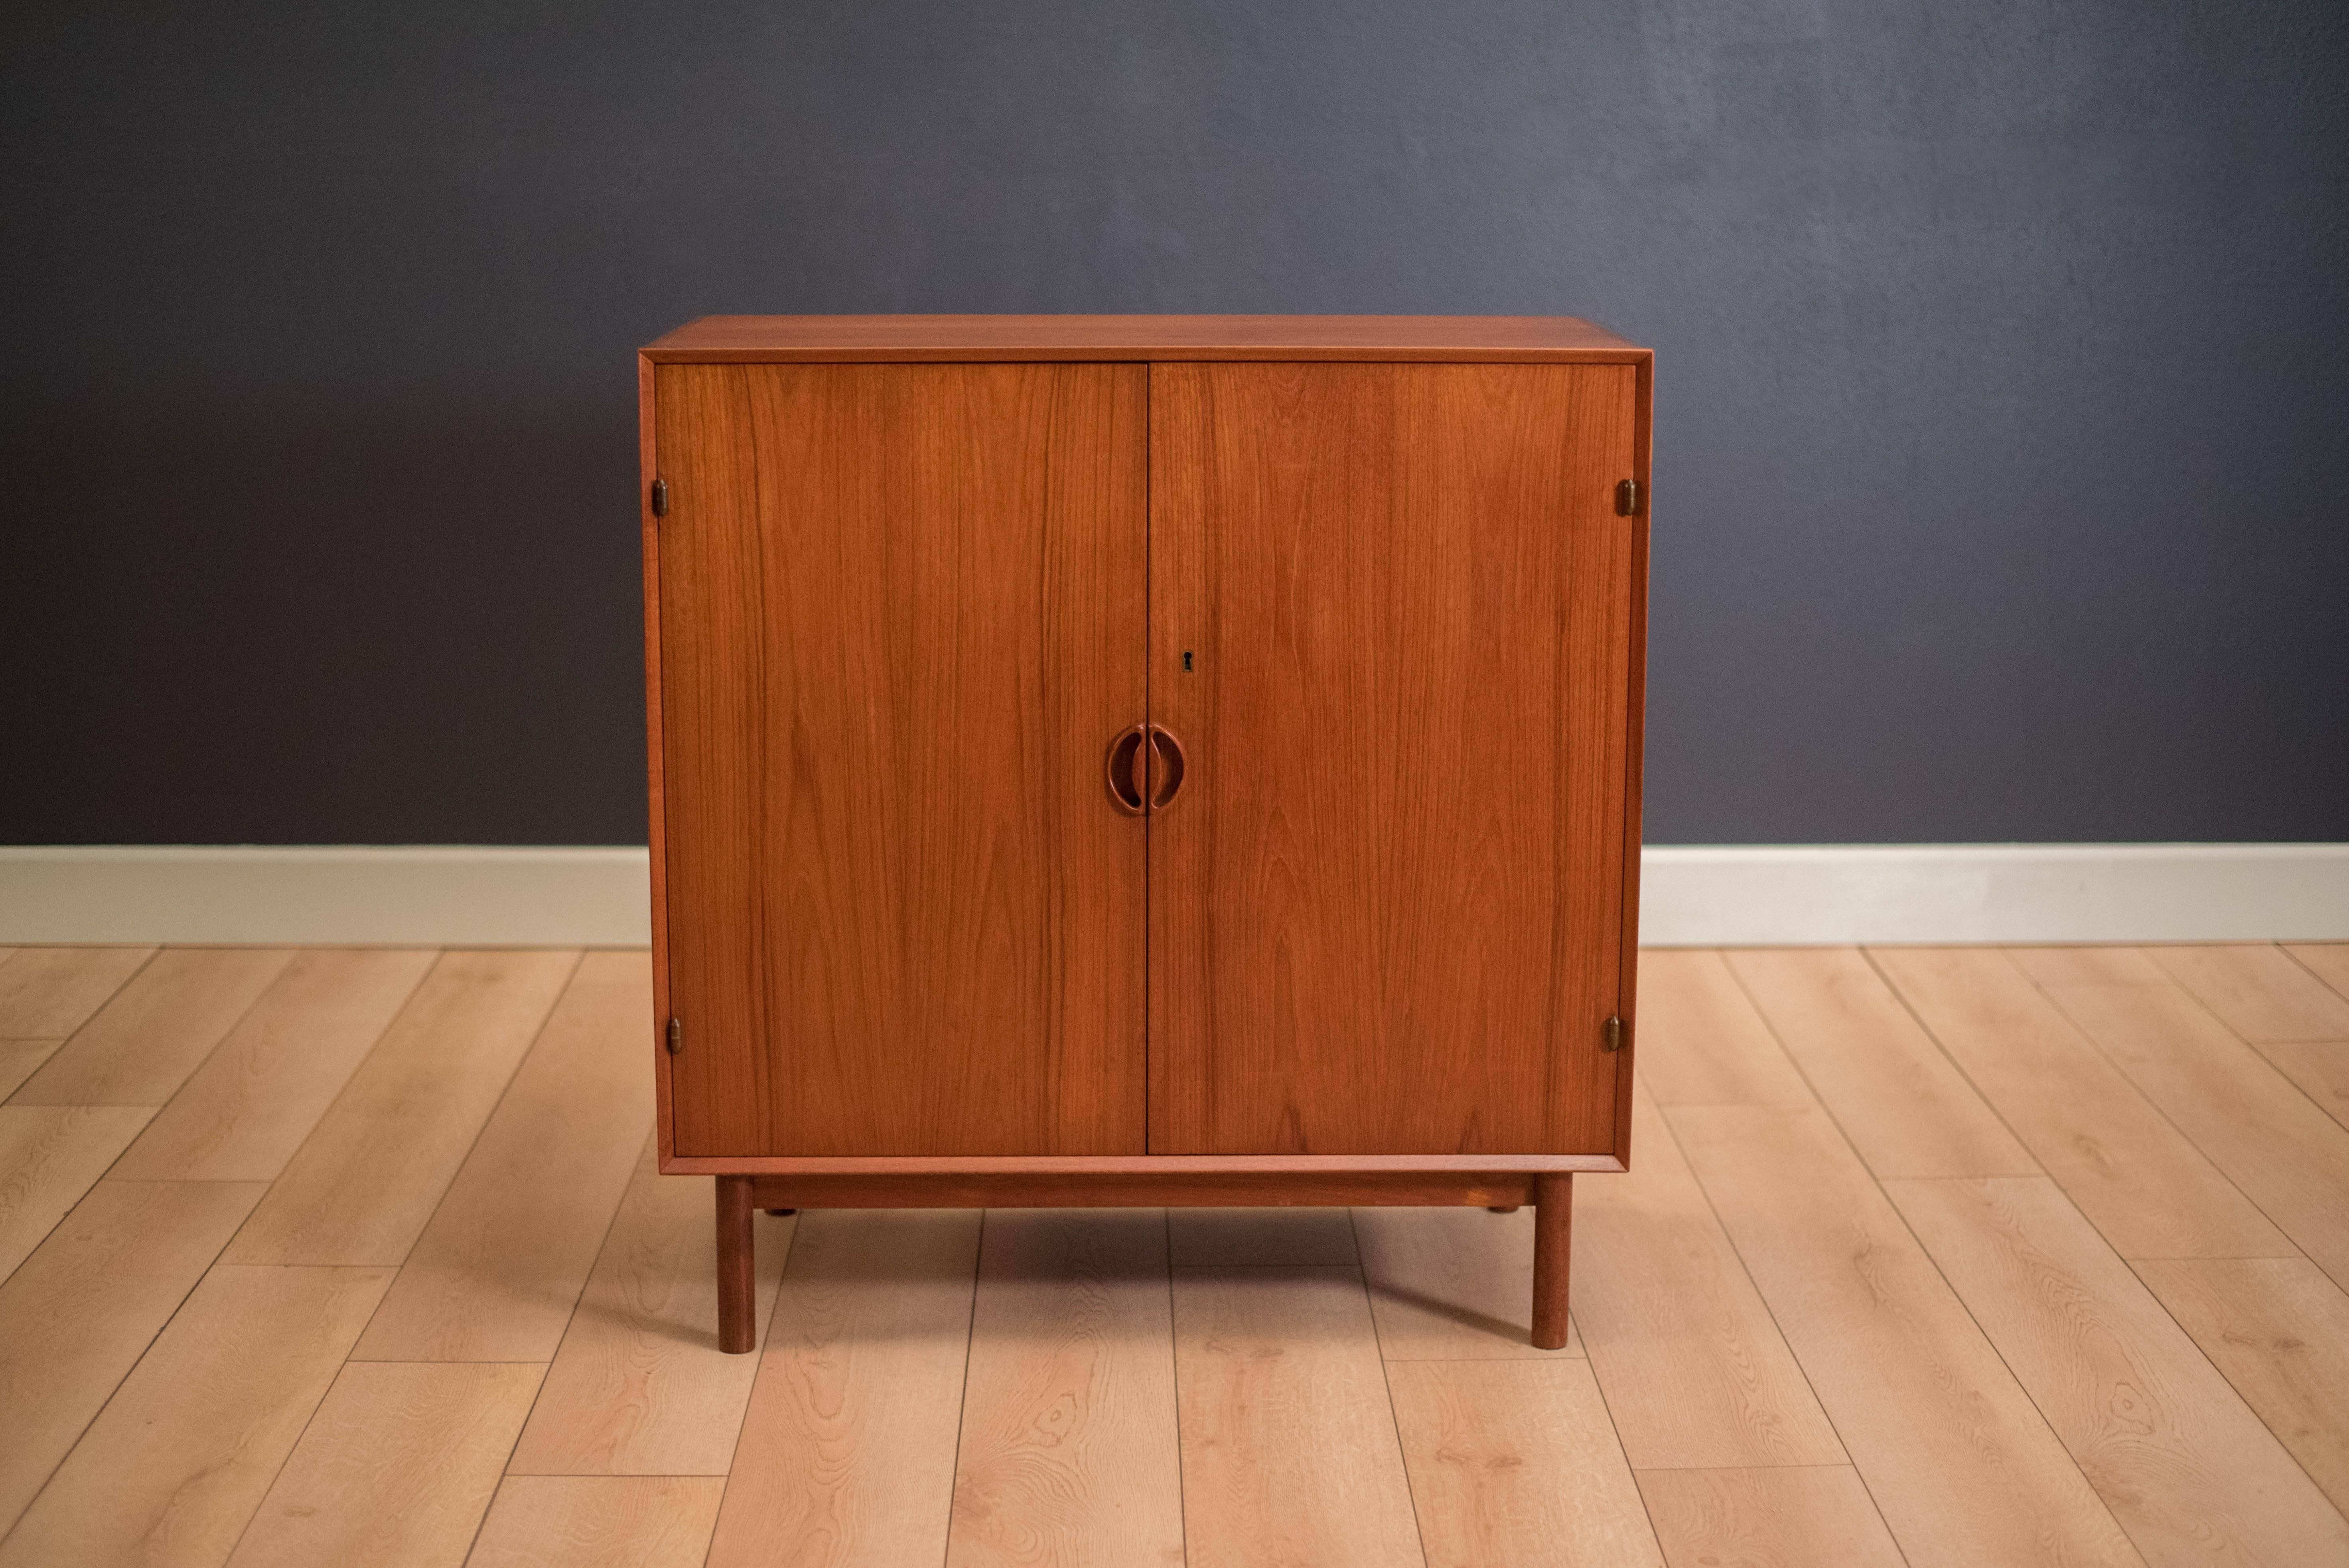 Mid-Century teak cabinet by Peter Hvidt and Orla Molgaard-Nielsen for Soborg Mobelfabrik. This piece displays detailed finger joinery and sculpted wood handles. Interior of cabinet features three sliding drawers and one adjustable shelf. Skeleton